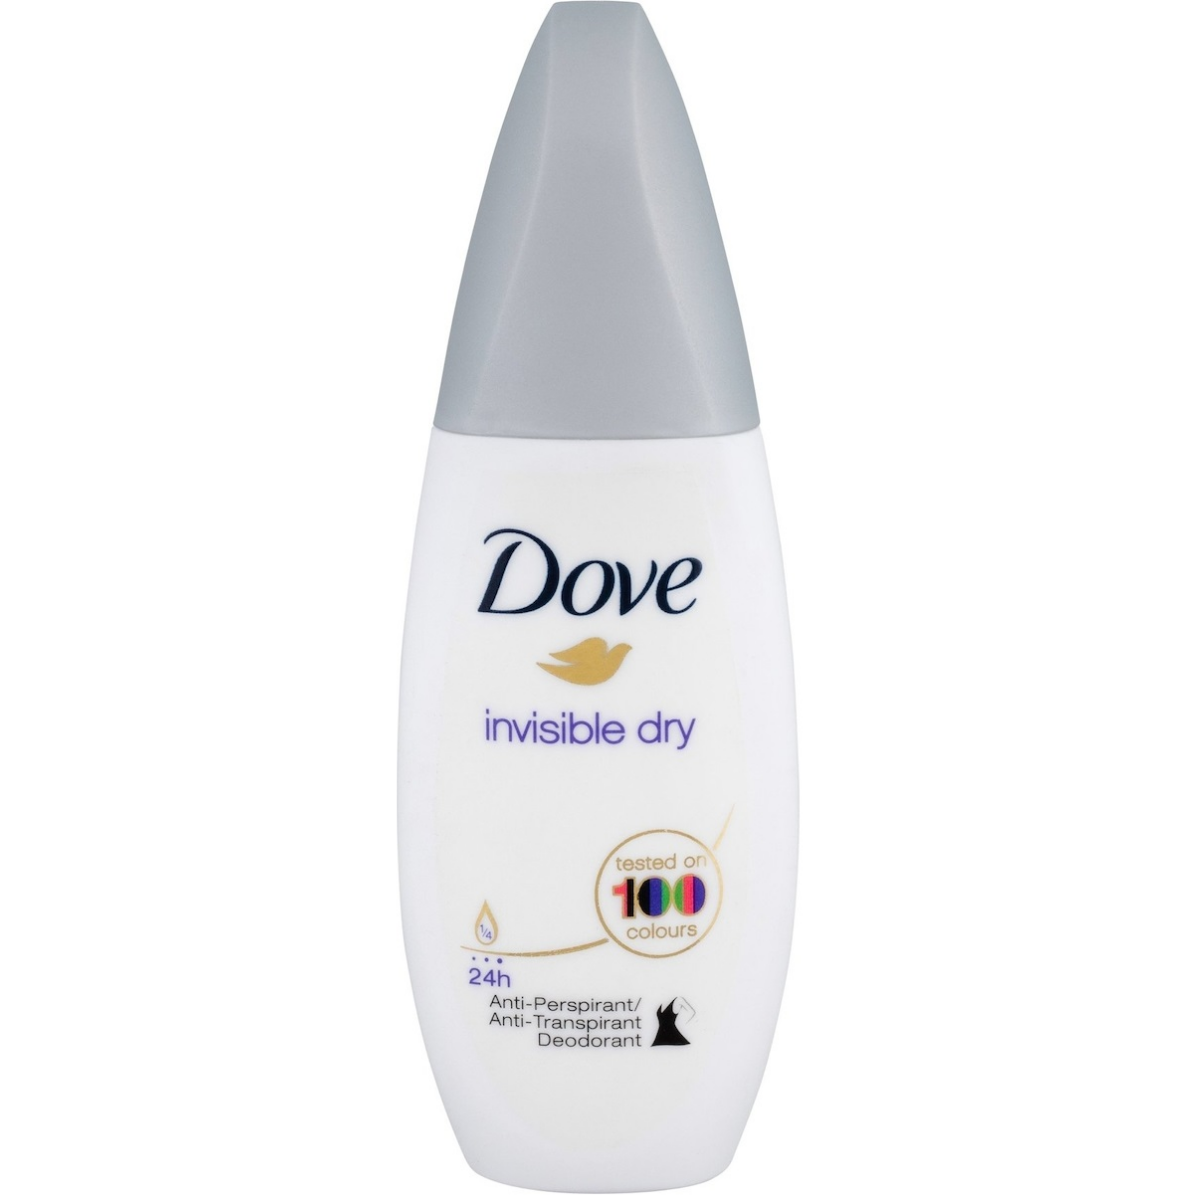 Dove Invisible Dry Tested on 100 Colour 24h Deodorant Spray 75ml.